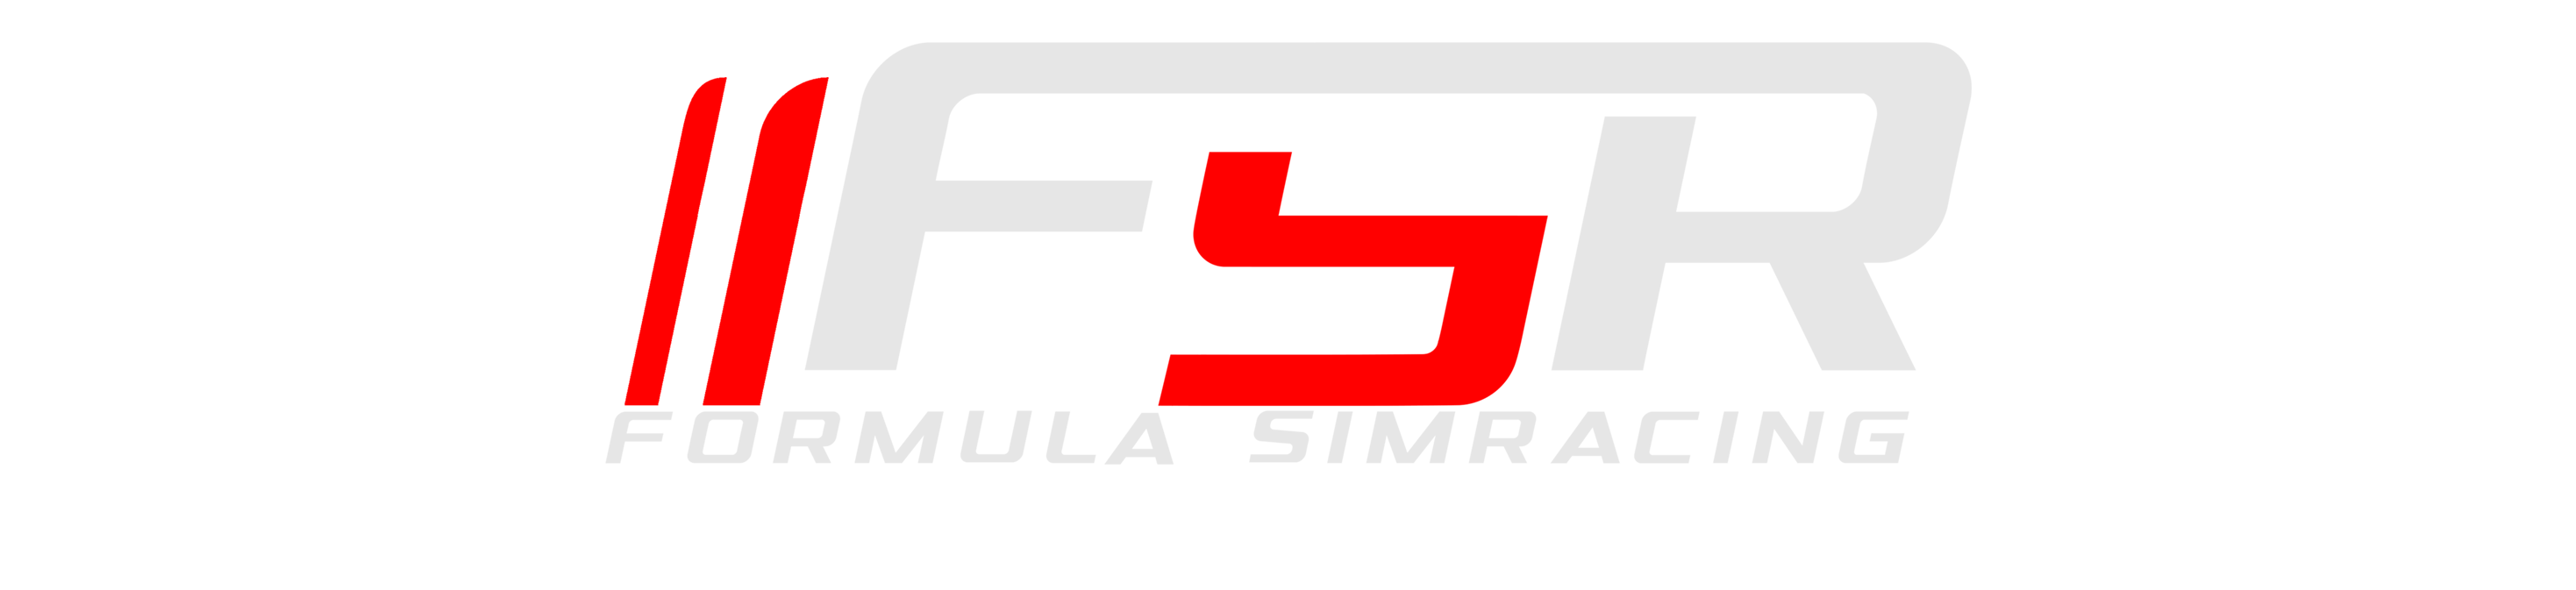 Formula SimRacing - The Official RFactor2 Open Wheel Championship